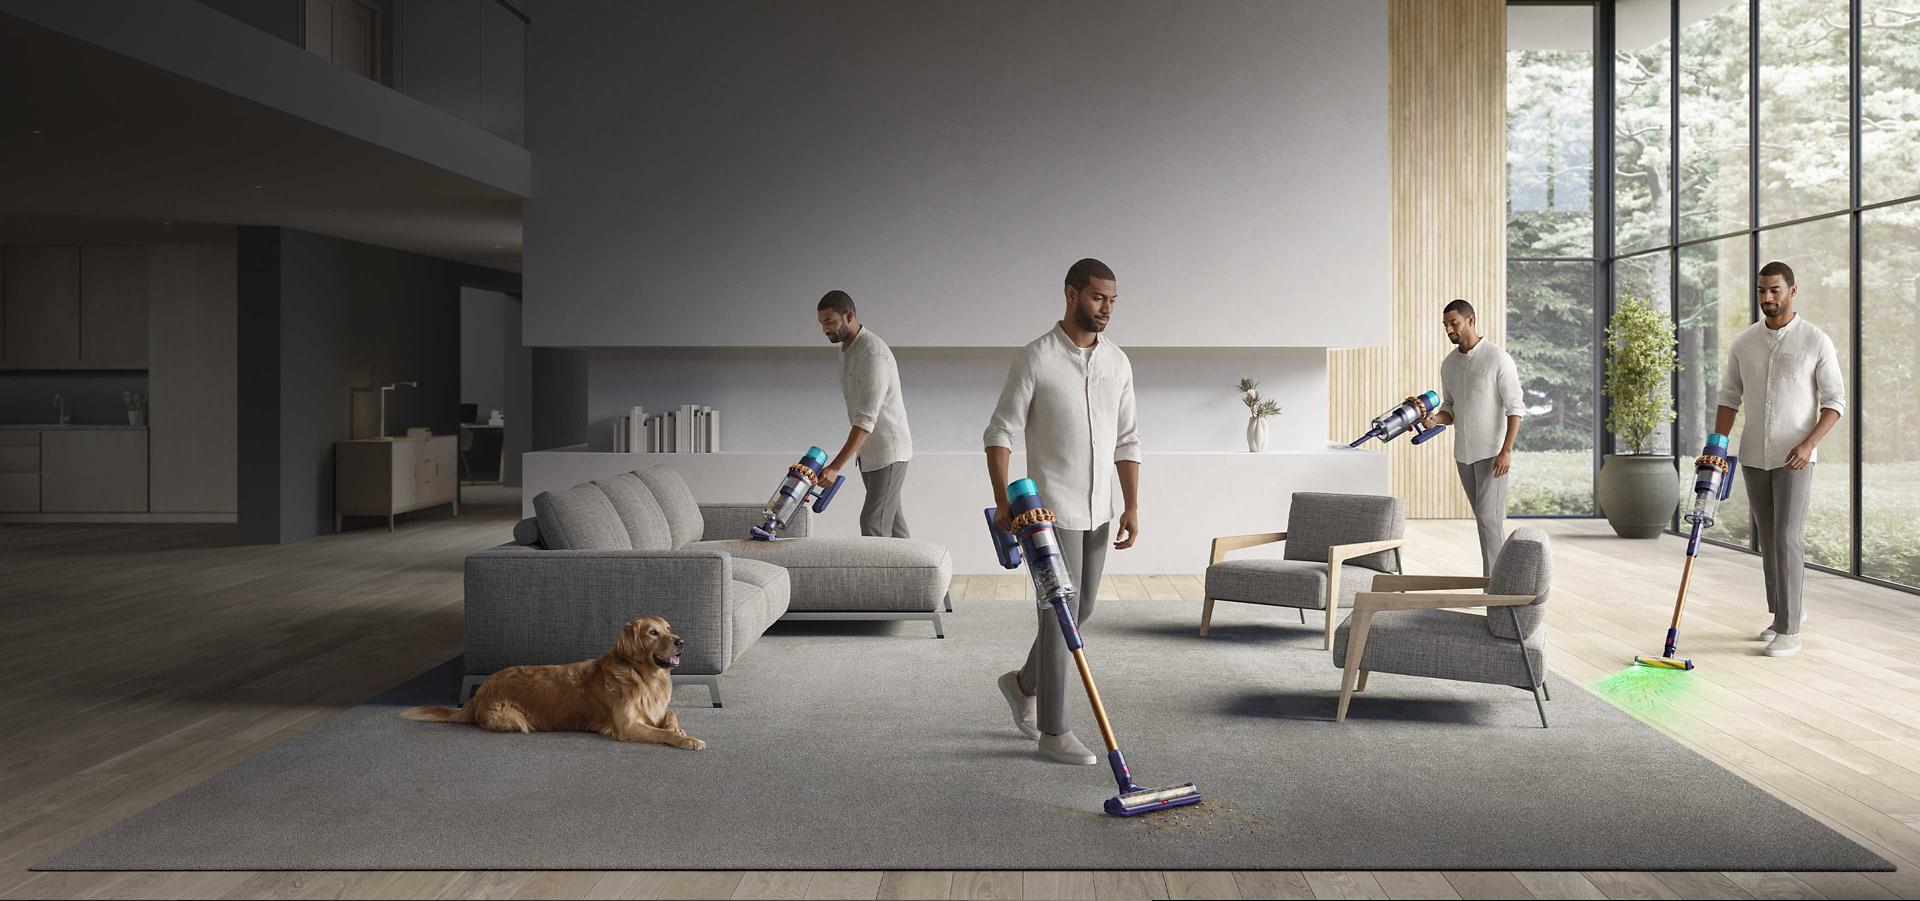 Man demonstrating the versatility of Dyson Gen5outsize, cleaning with different cleaner heads and tools all around a living room.